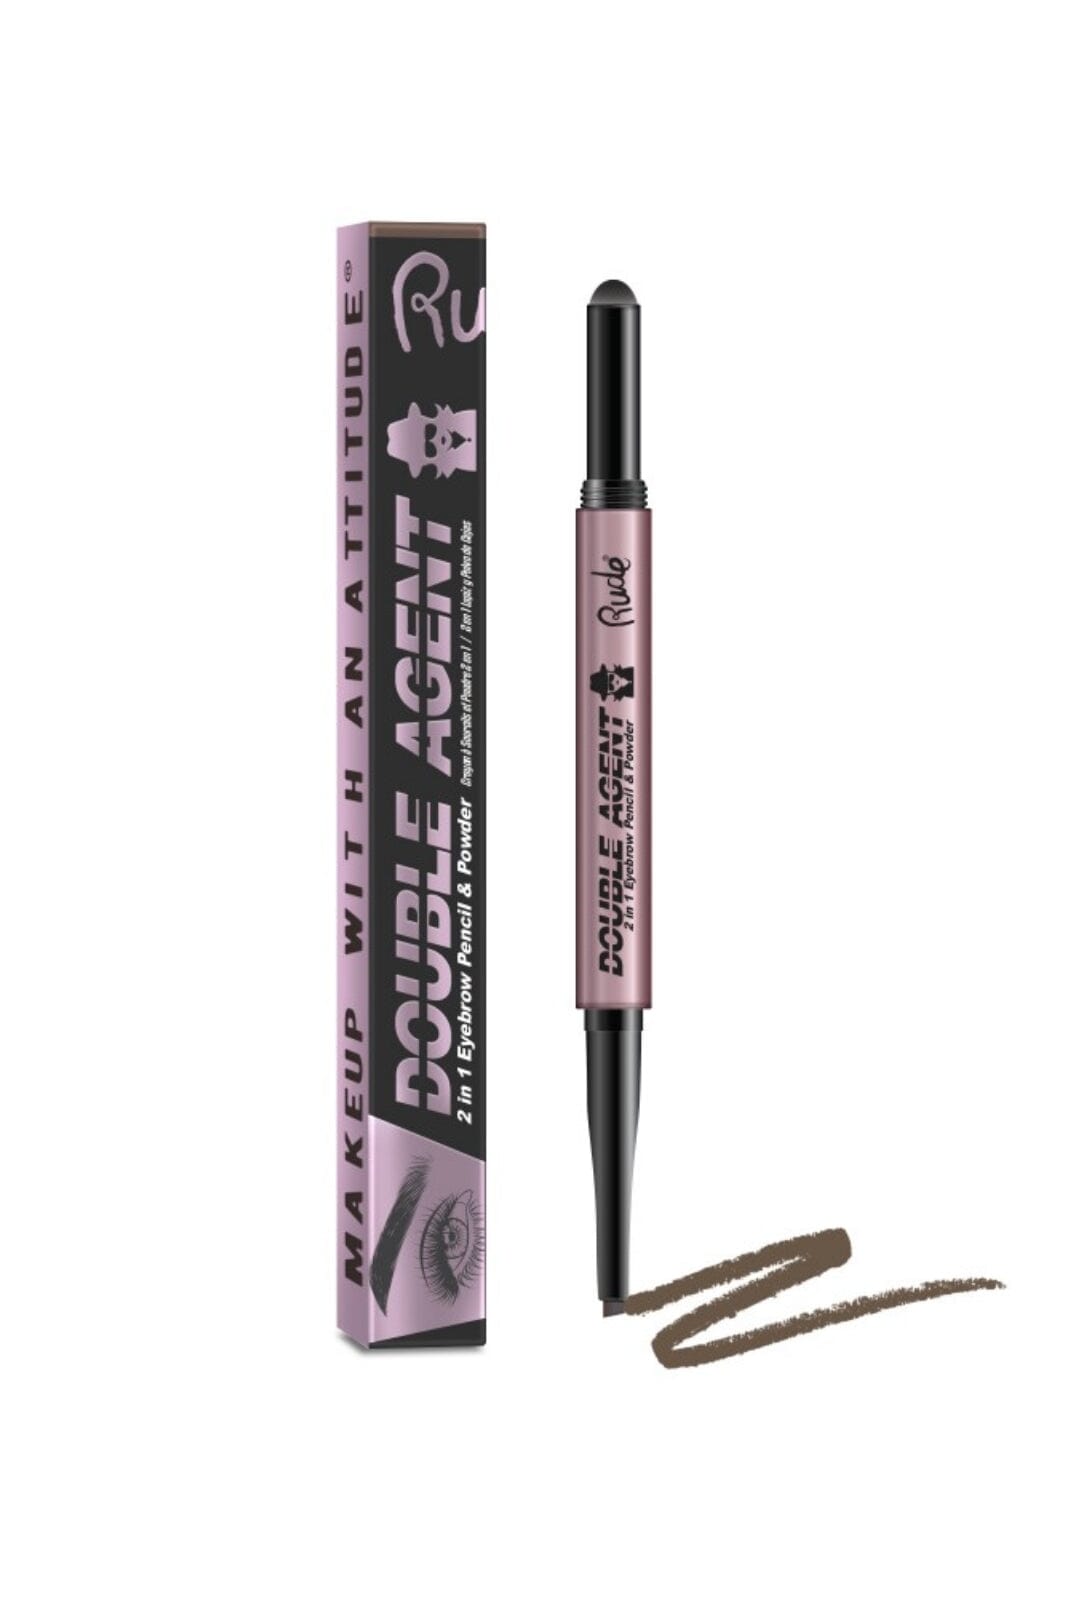 Rude Cosmetics - Double Agent - 2 in 1 Eyebrow Pencil & Powder - Taupe - Øjenbryn 